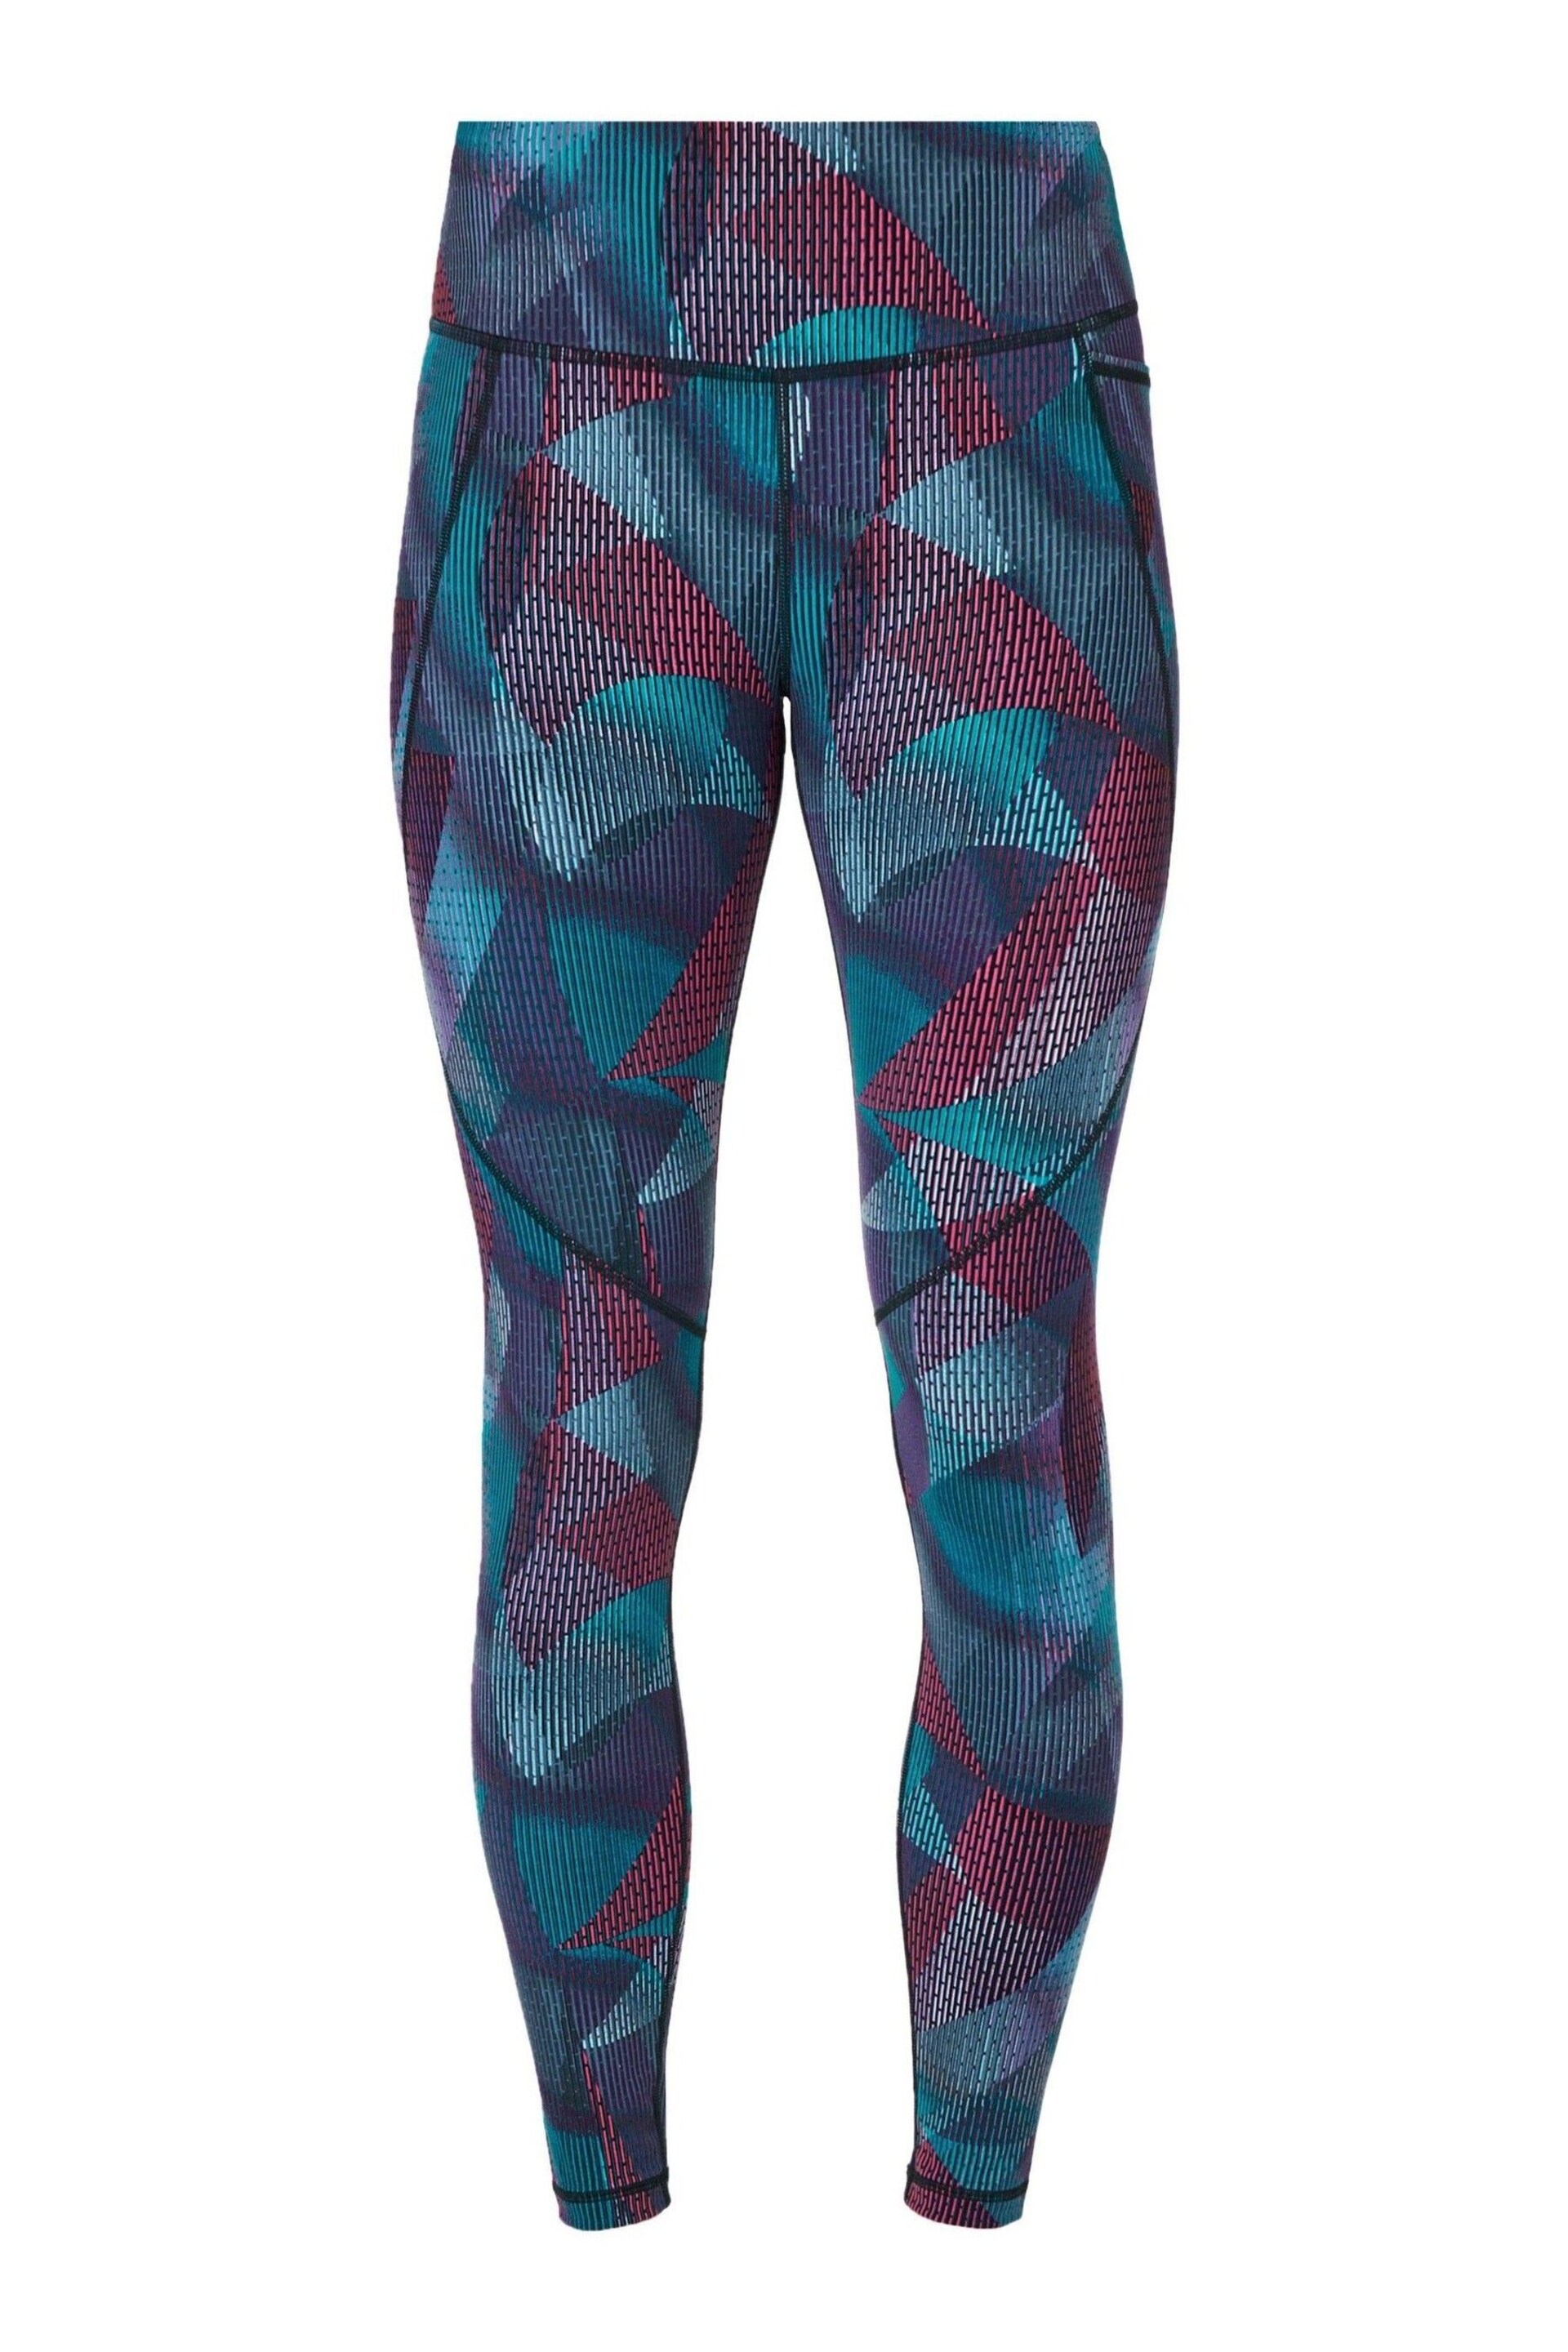 Sweaty Betty Grey Gradient Shapes Print Full Length Power Workout Leggings - Image 9 of 9